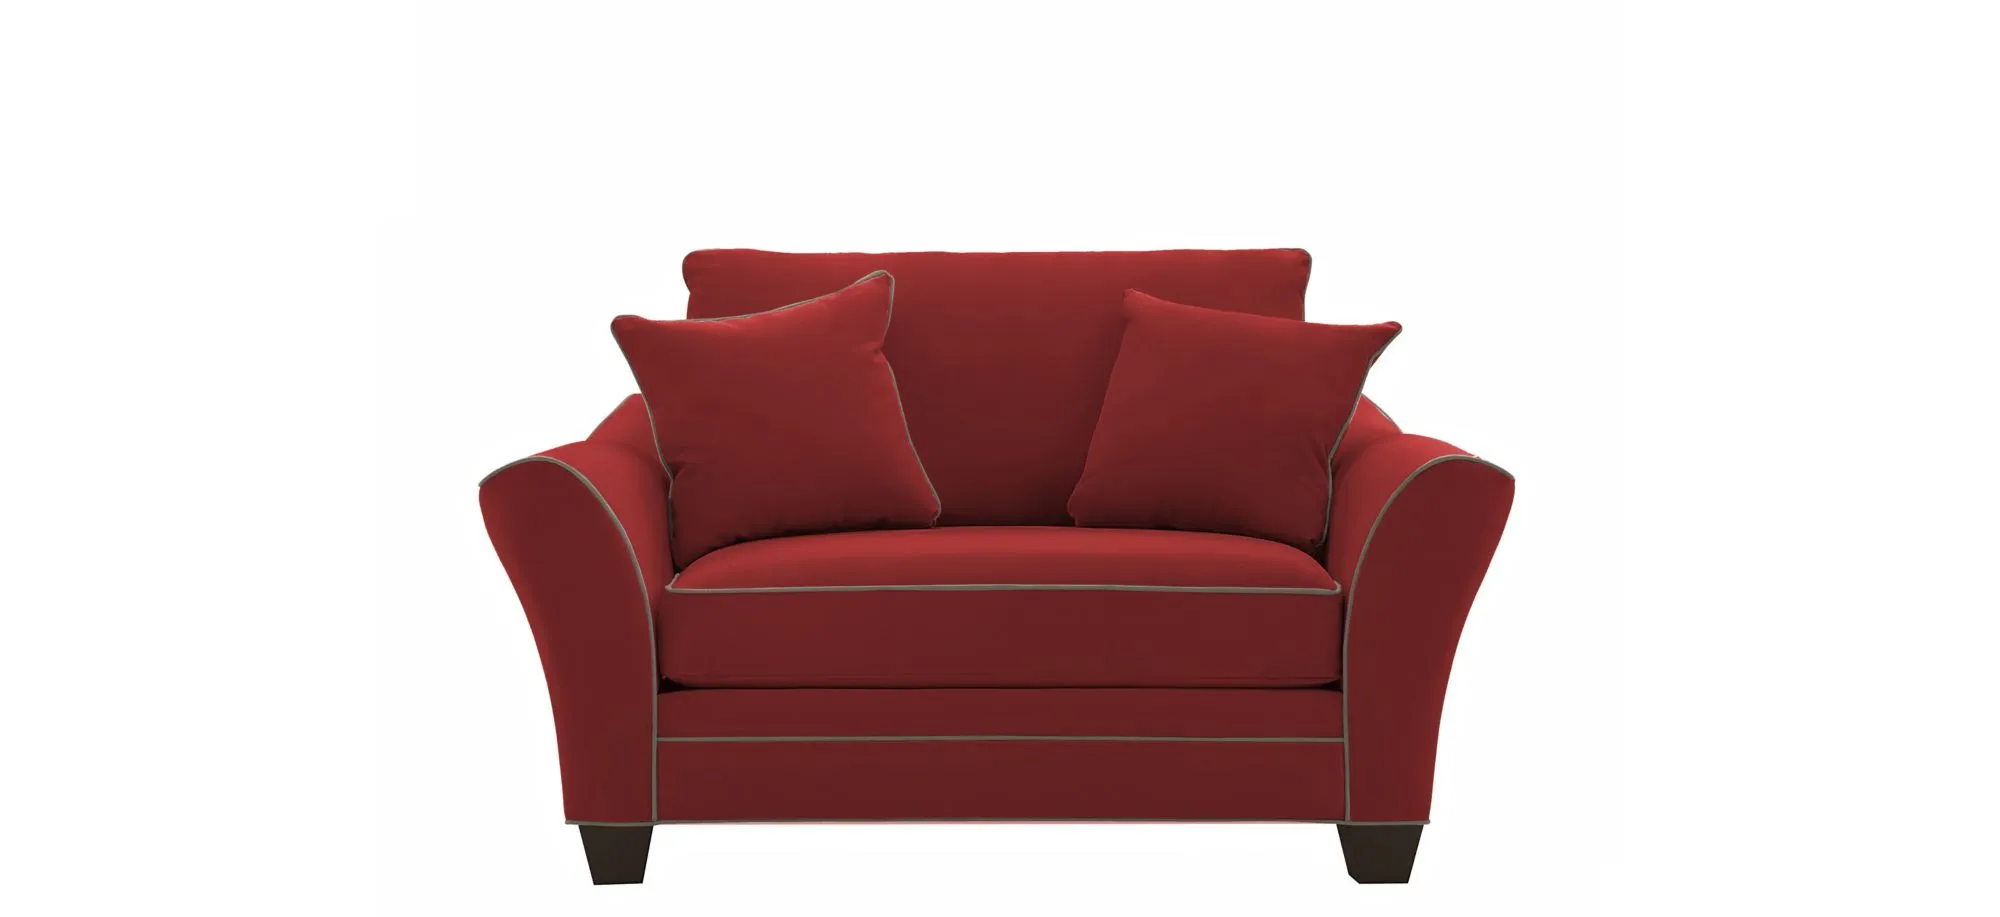 Briarwood Chair-and-a-Half in Suede So Soft Cardinal/Mineral by H.M. Richards